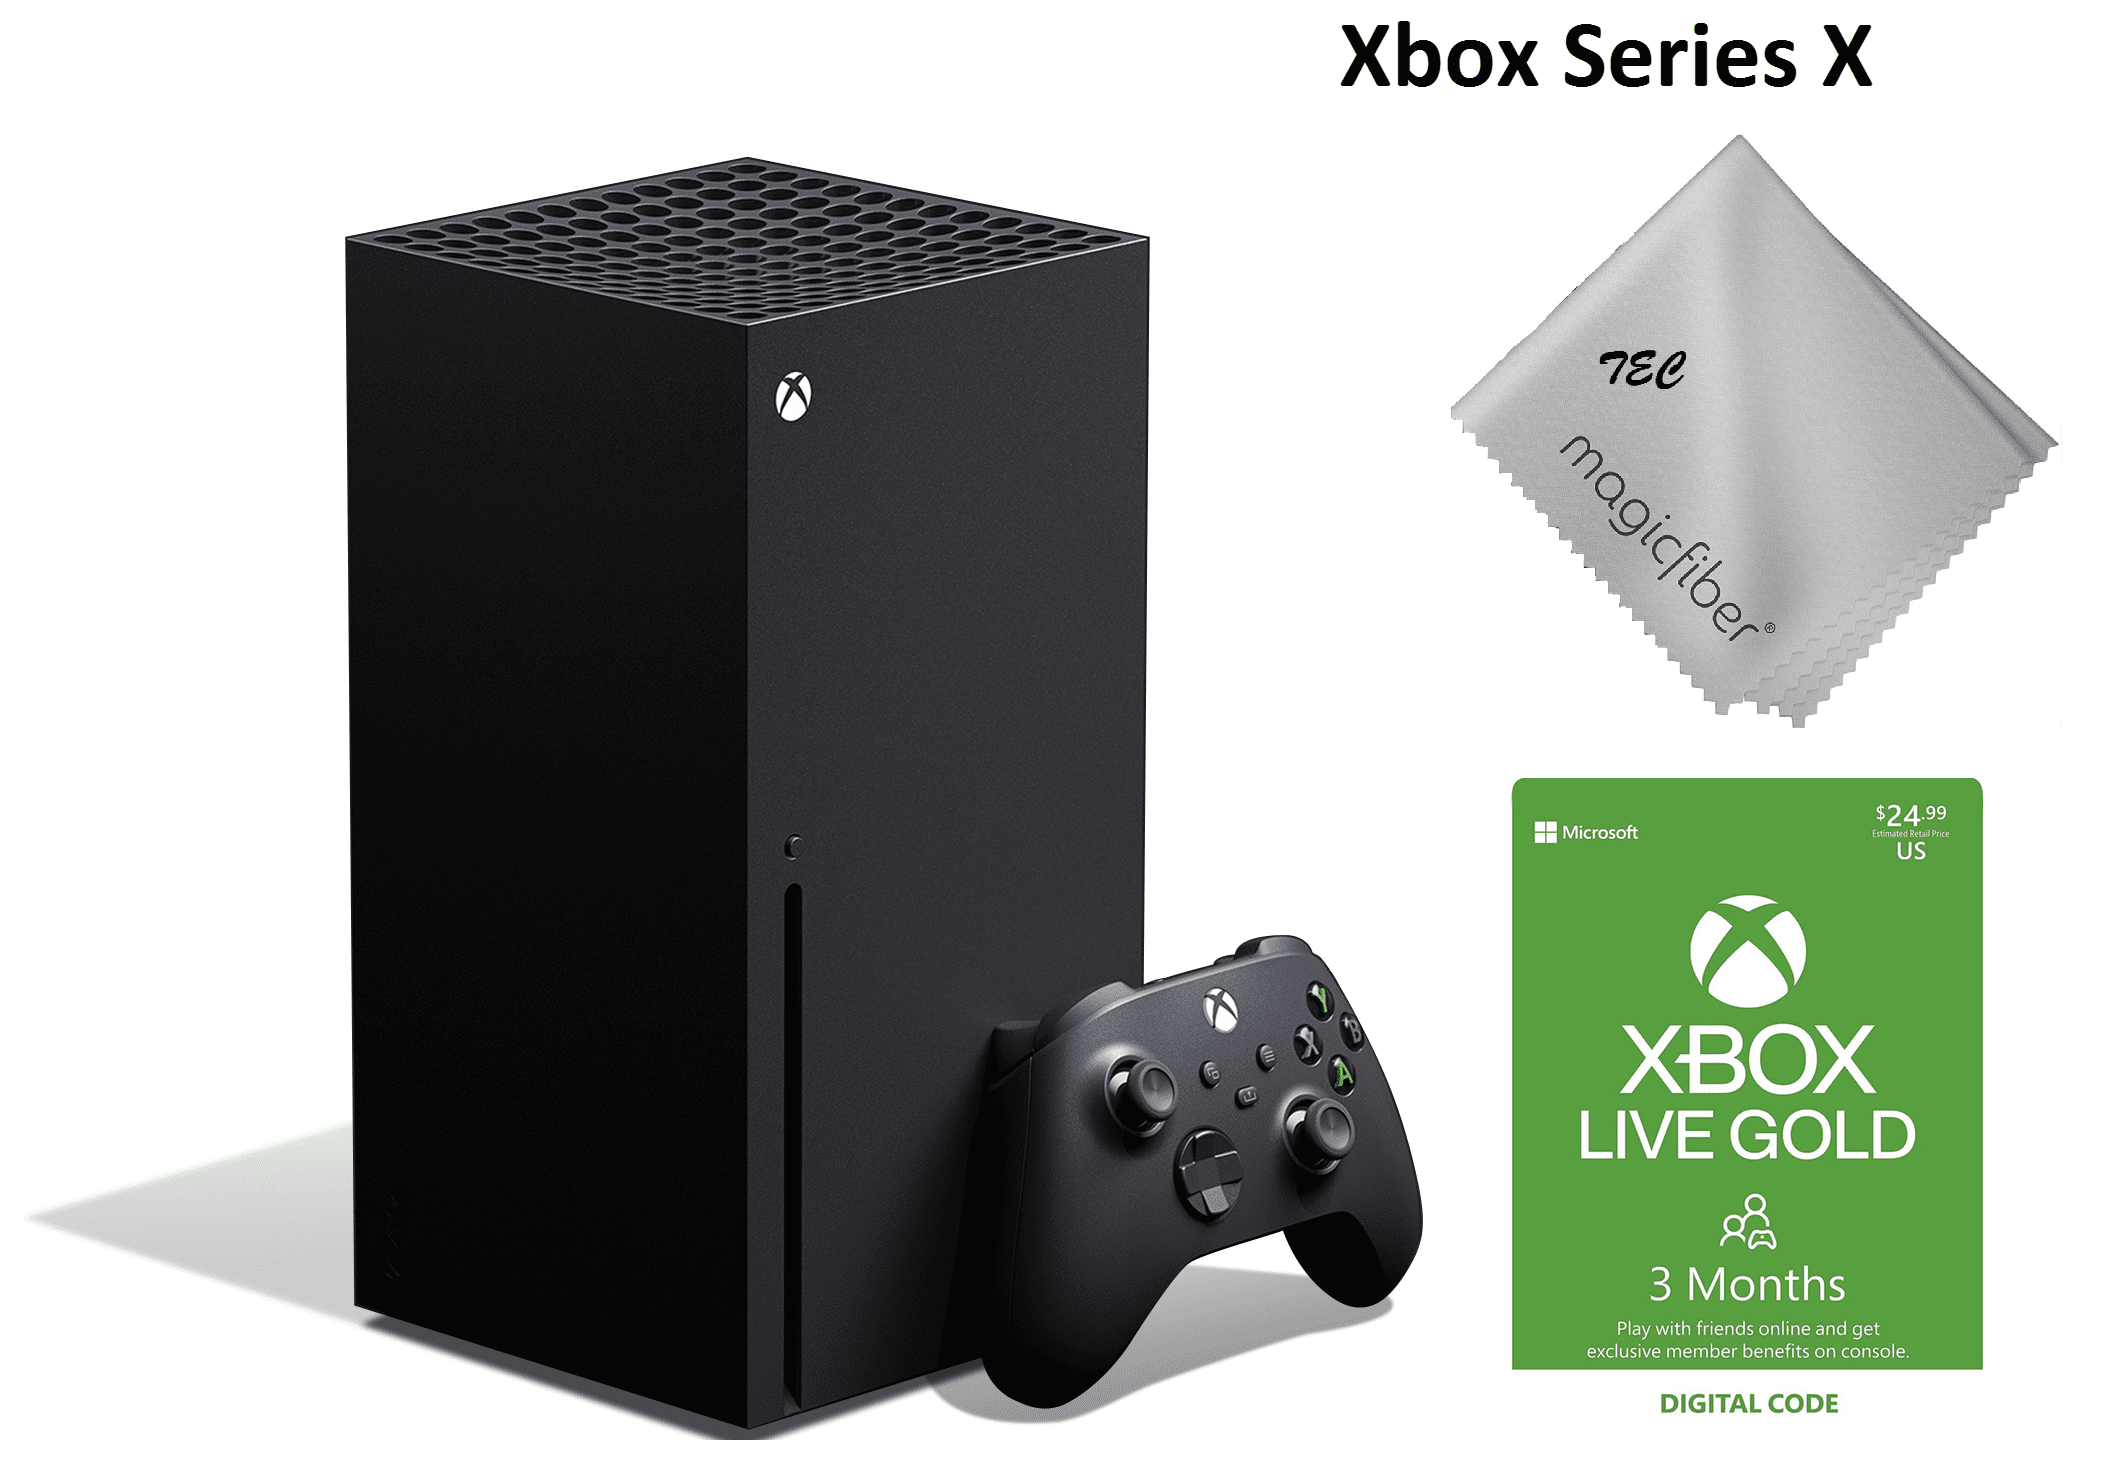 Newest -Microsoft Xbox Series X - Gaming Console Black with Disc Drive